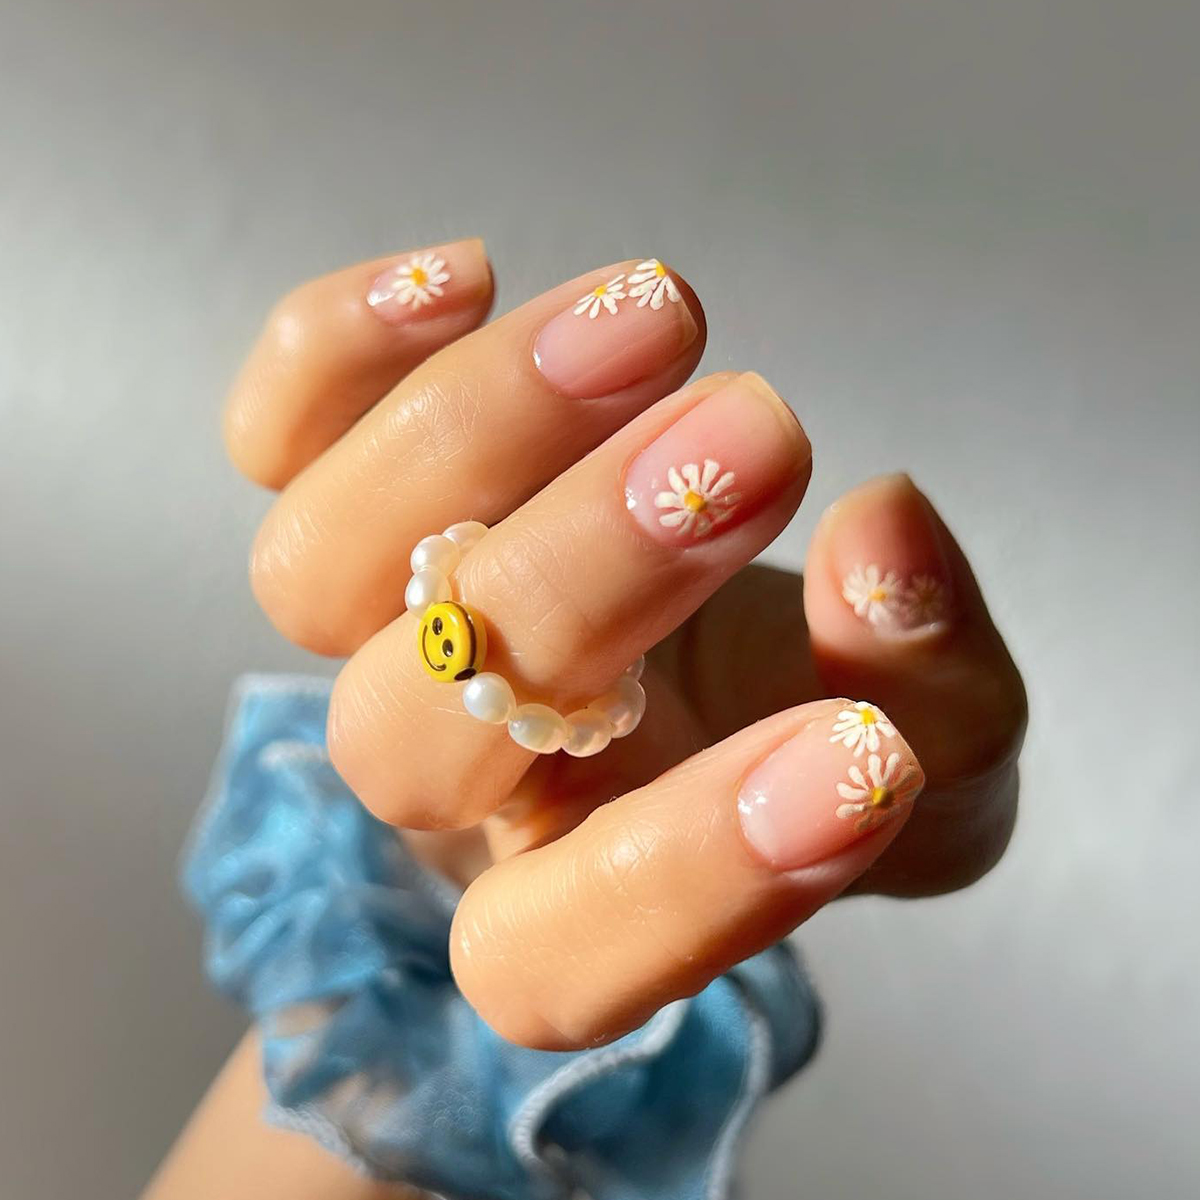 14 Summer Nail Designs That Are So Chic for 2022 | Who What Wear